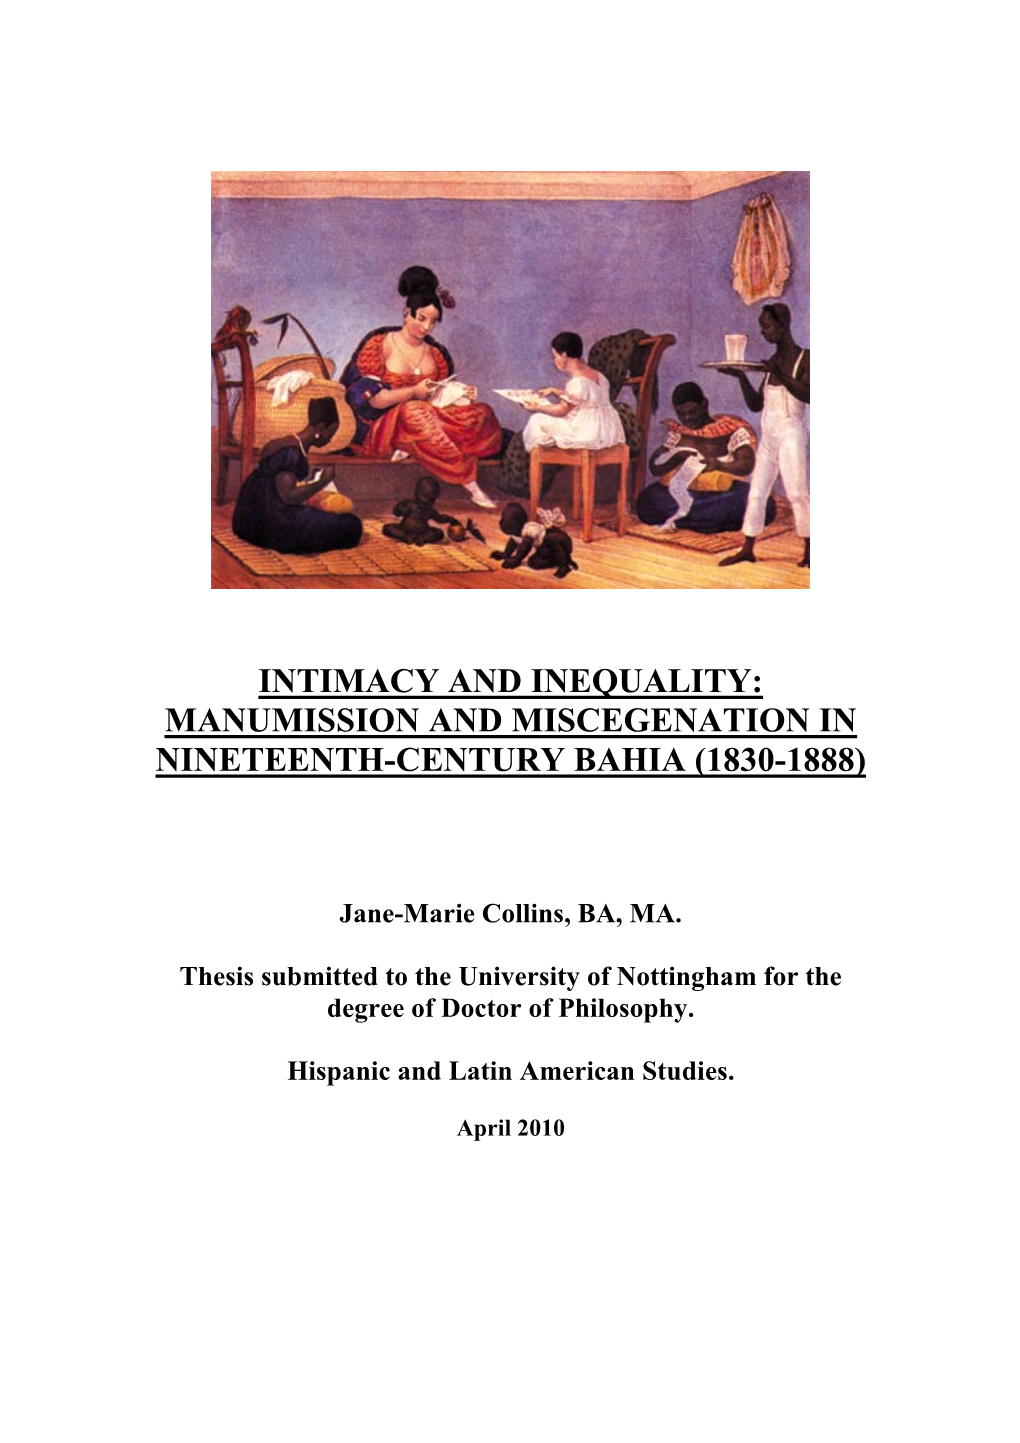 Intimacy and Inequality: Manumission and Miscegenation in Nineteenth-Century Bahia (1830-1888)